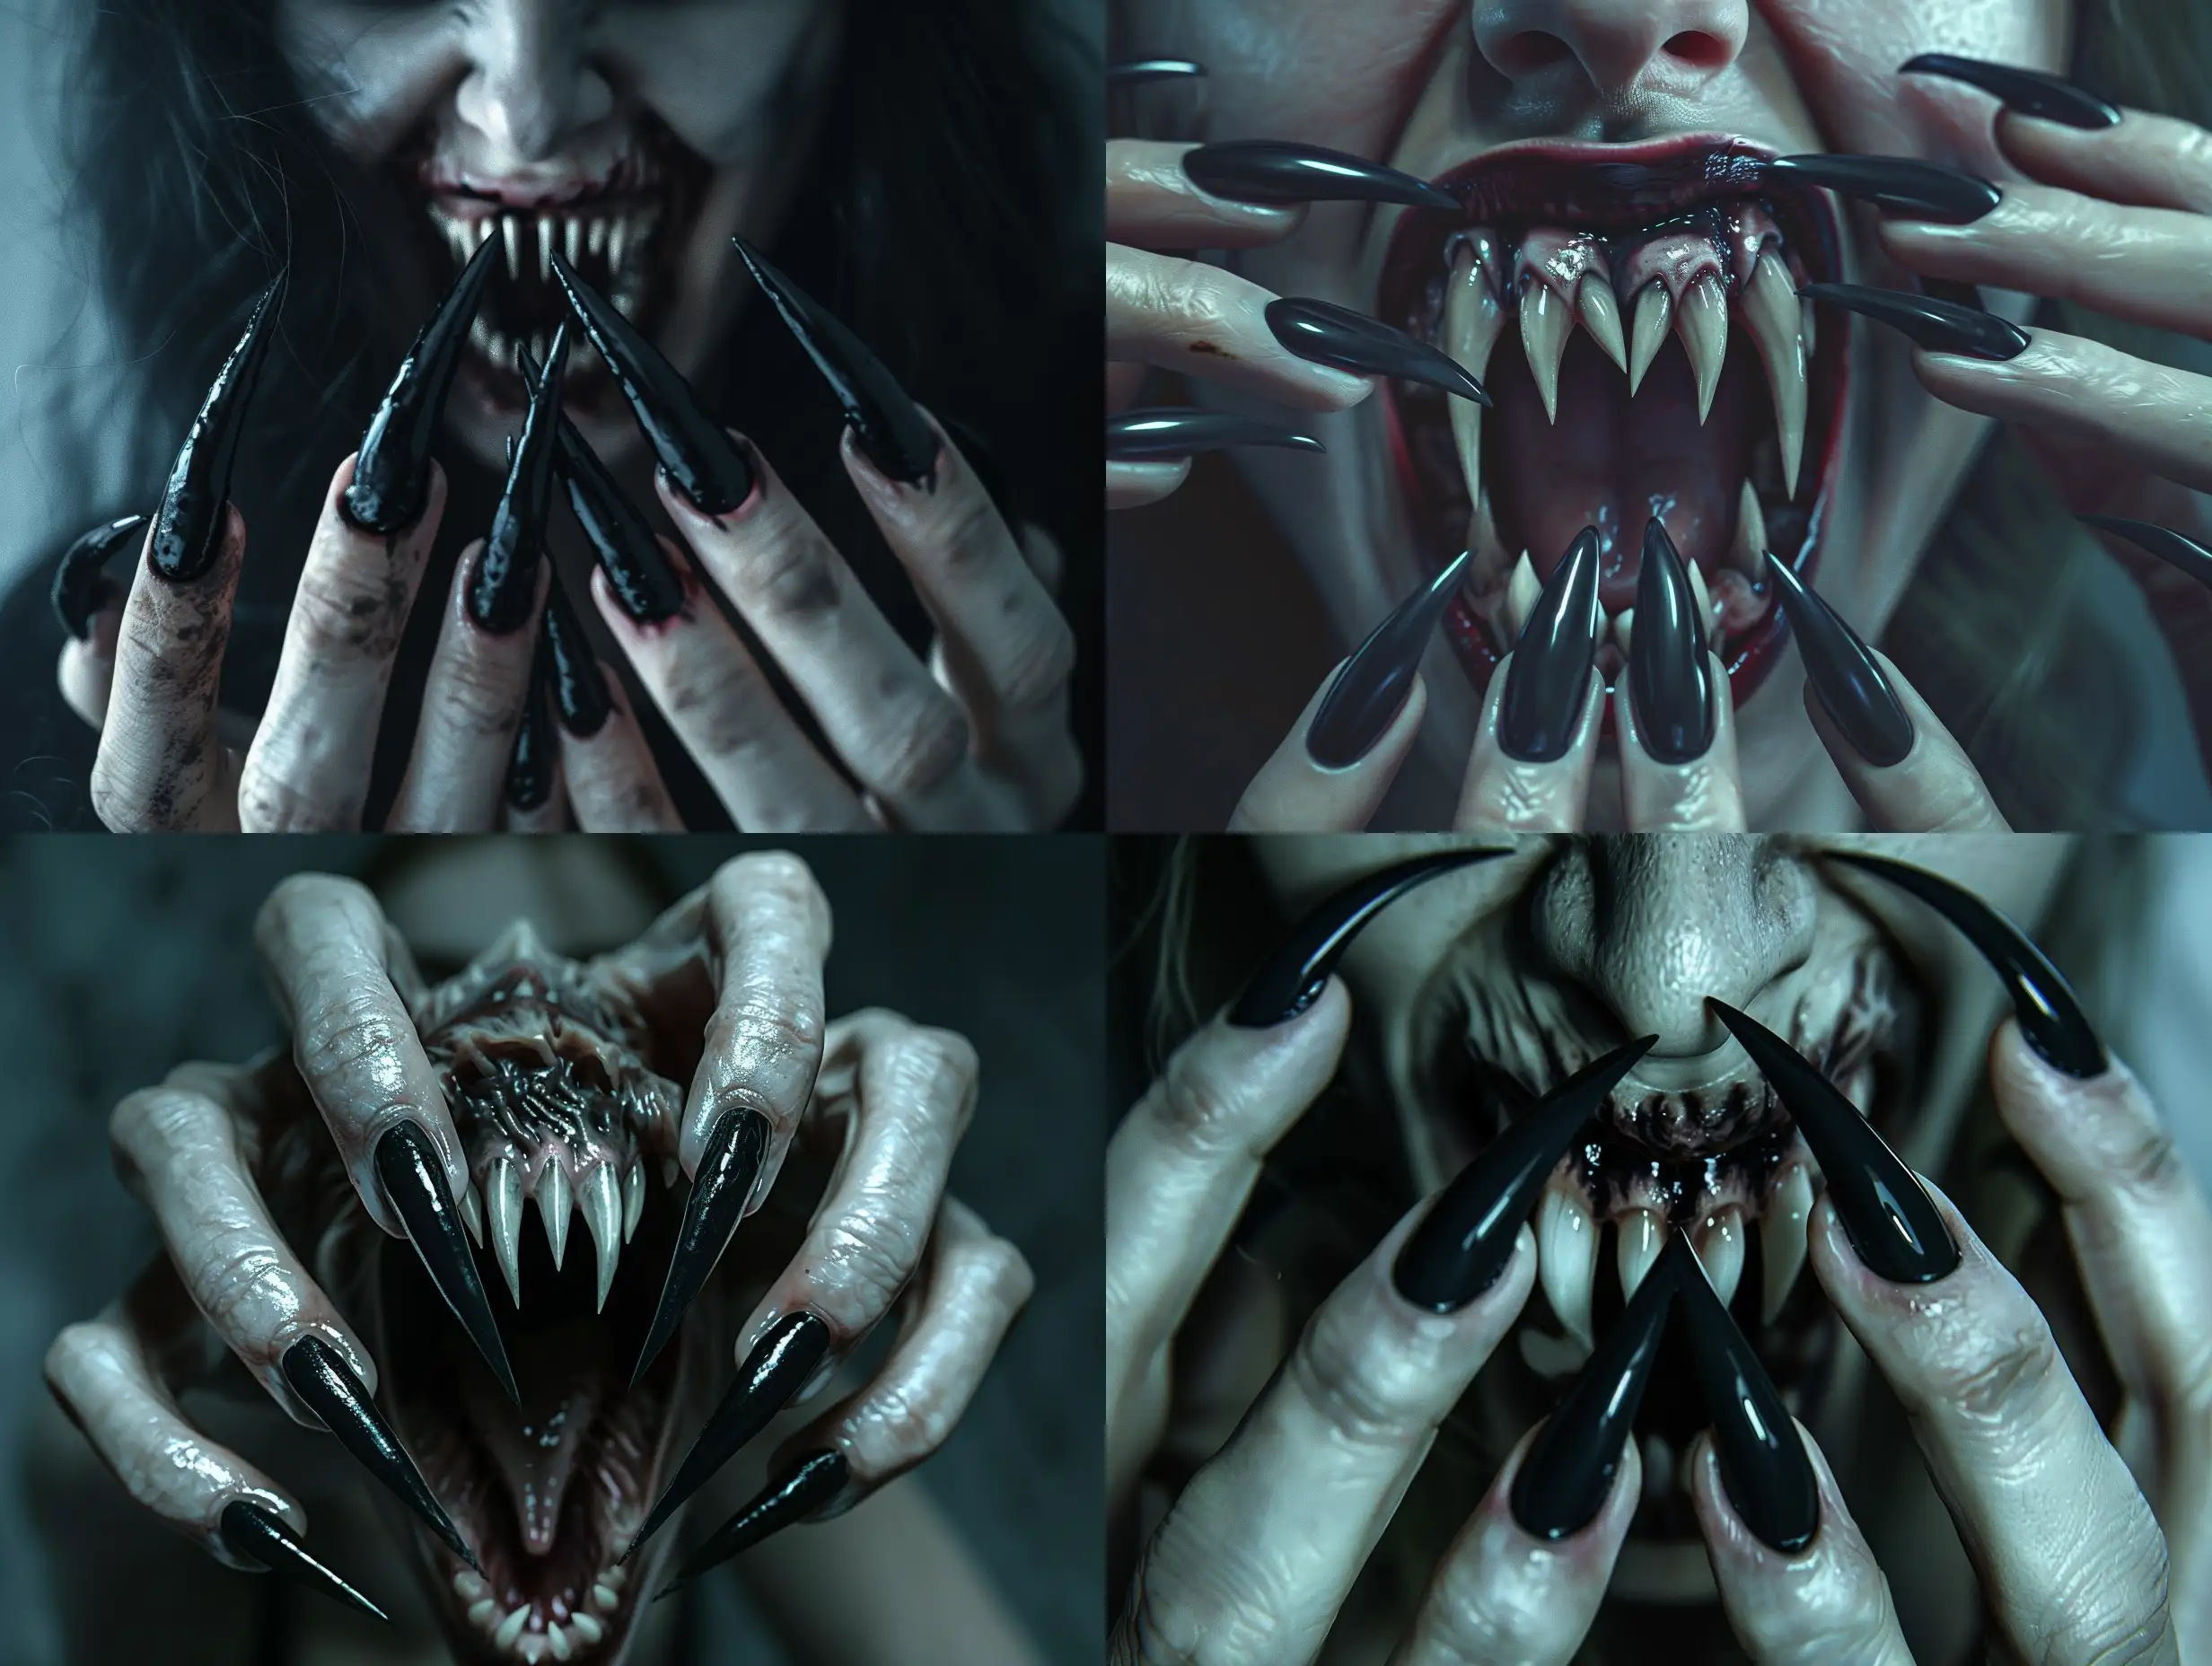 Photorealism of a monstruos female vampire with long pointed black nails, and pointed horrible teeth scary expression, dark atmosphere, high quality, photorealistic, terrifying, aggressive, scary predator fangs, detailed nails, horror, atmospheric lighting, full body, realistic hyper - detail, playful character designs, full anatomical. human hands, very clear without flaws with five fingers detailed